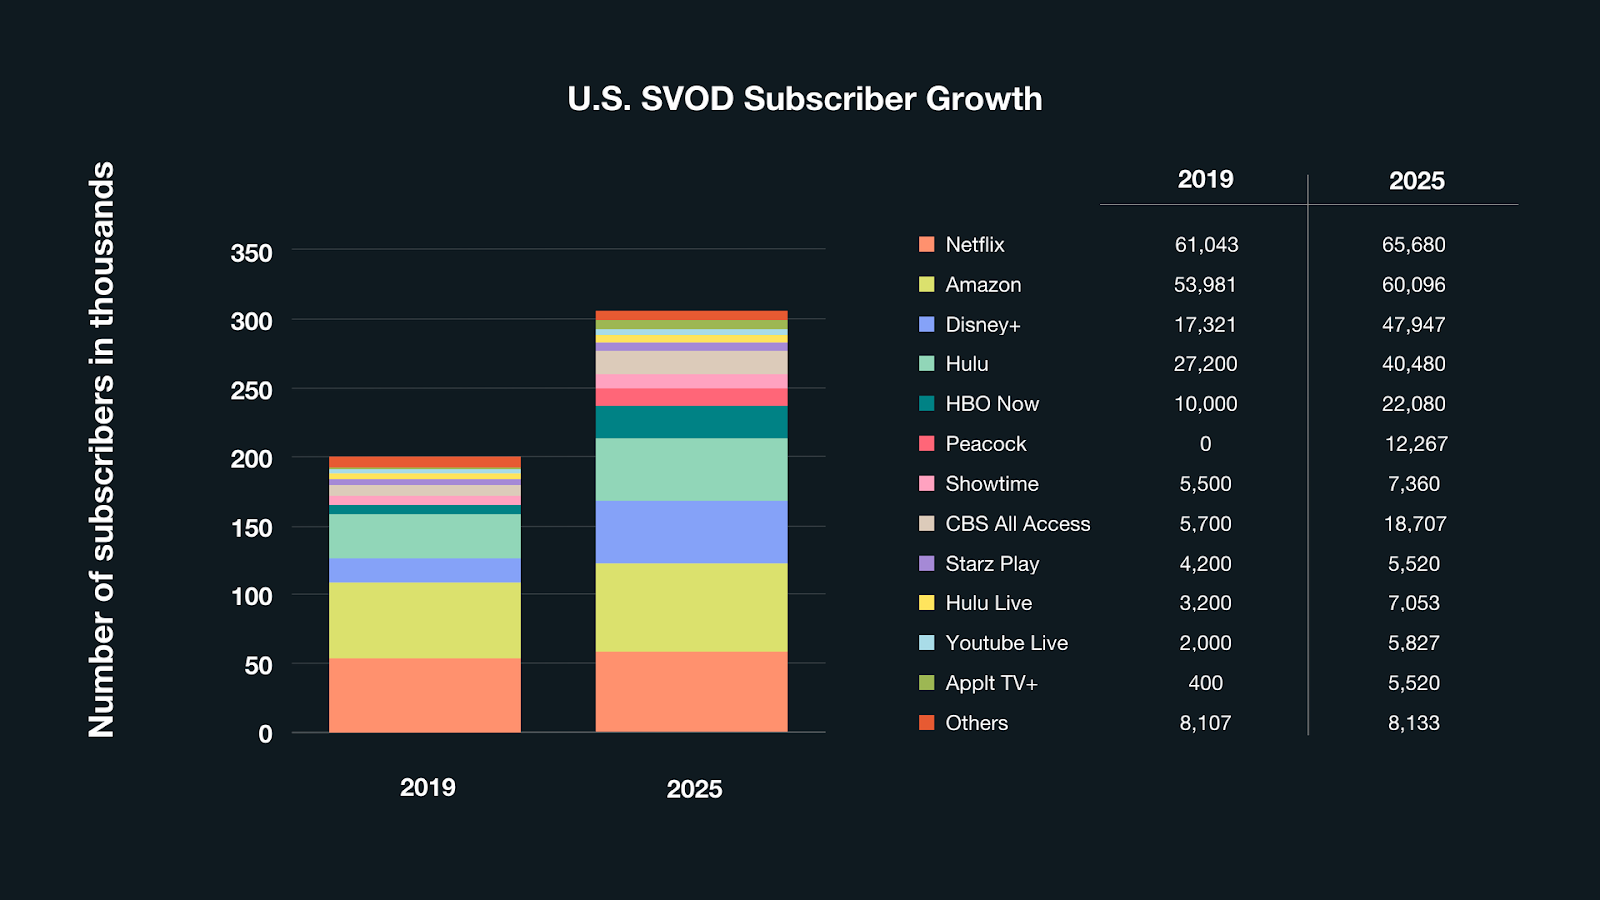 Graph of U.S. SVOD subscriber growth.